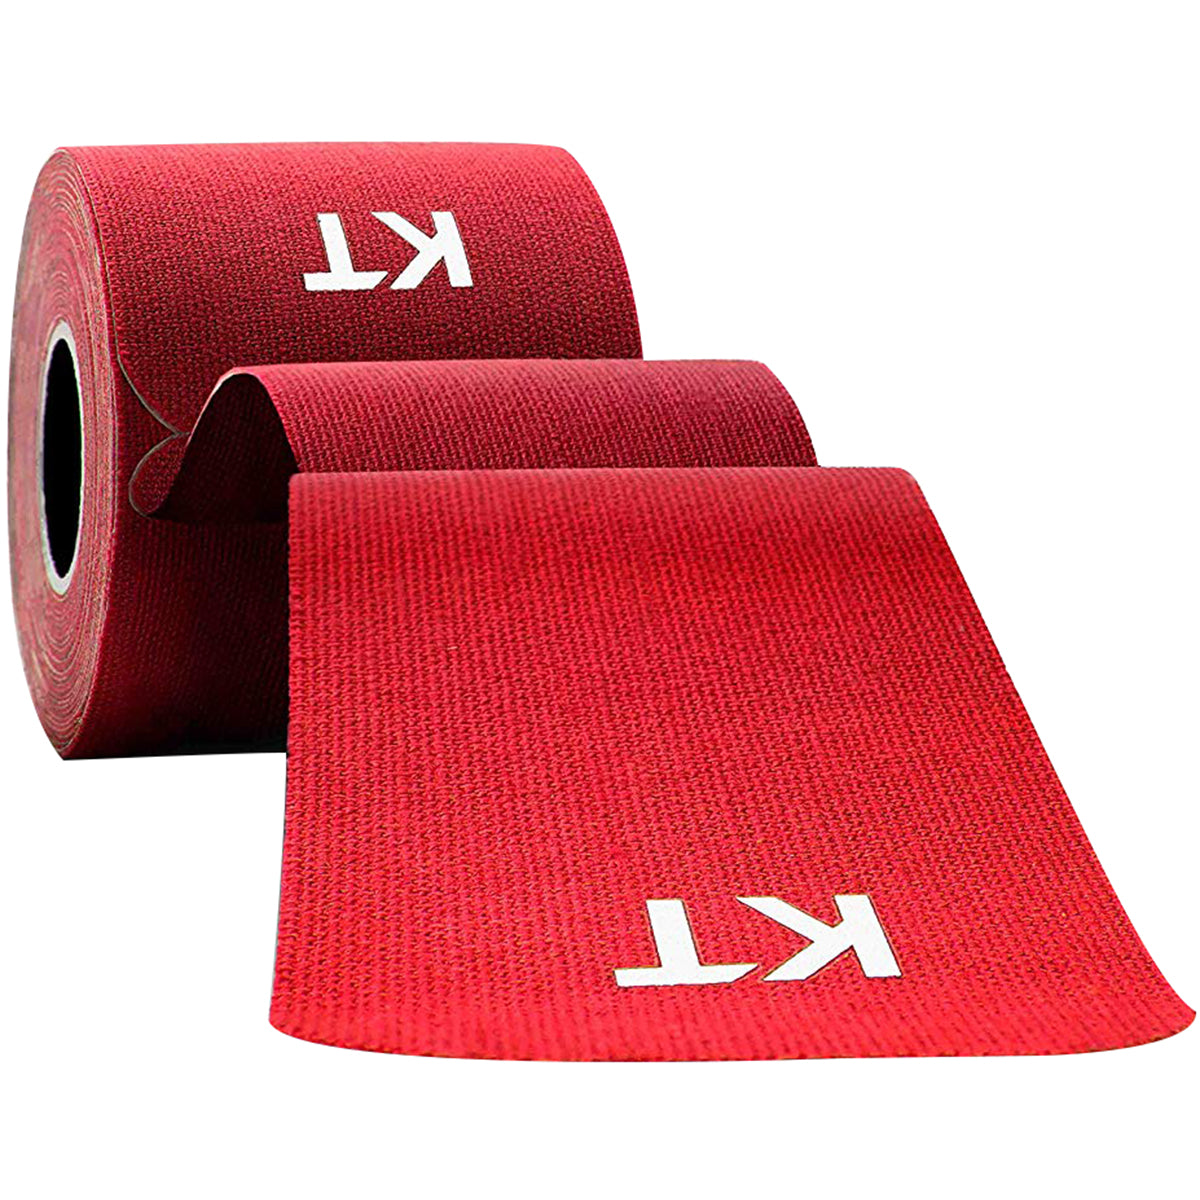 KT Tape Cotton 10" Precut Kinesiology Therapeutic Sports Roll, 20 Strips, Red KT Tape